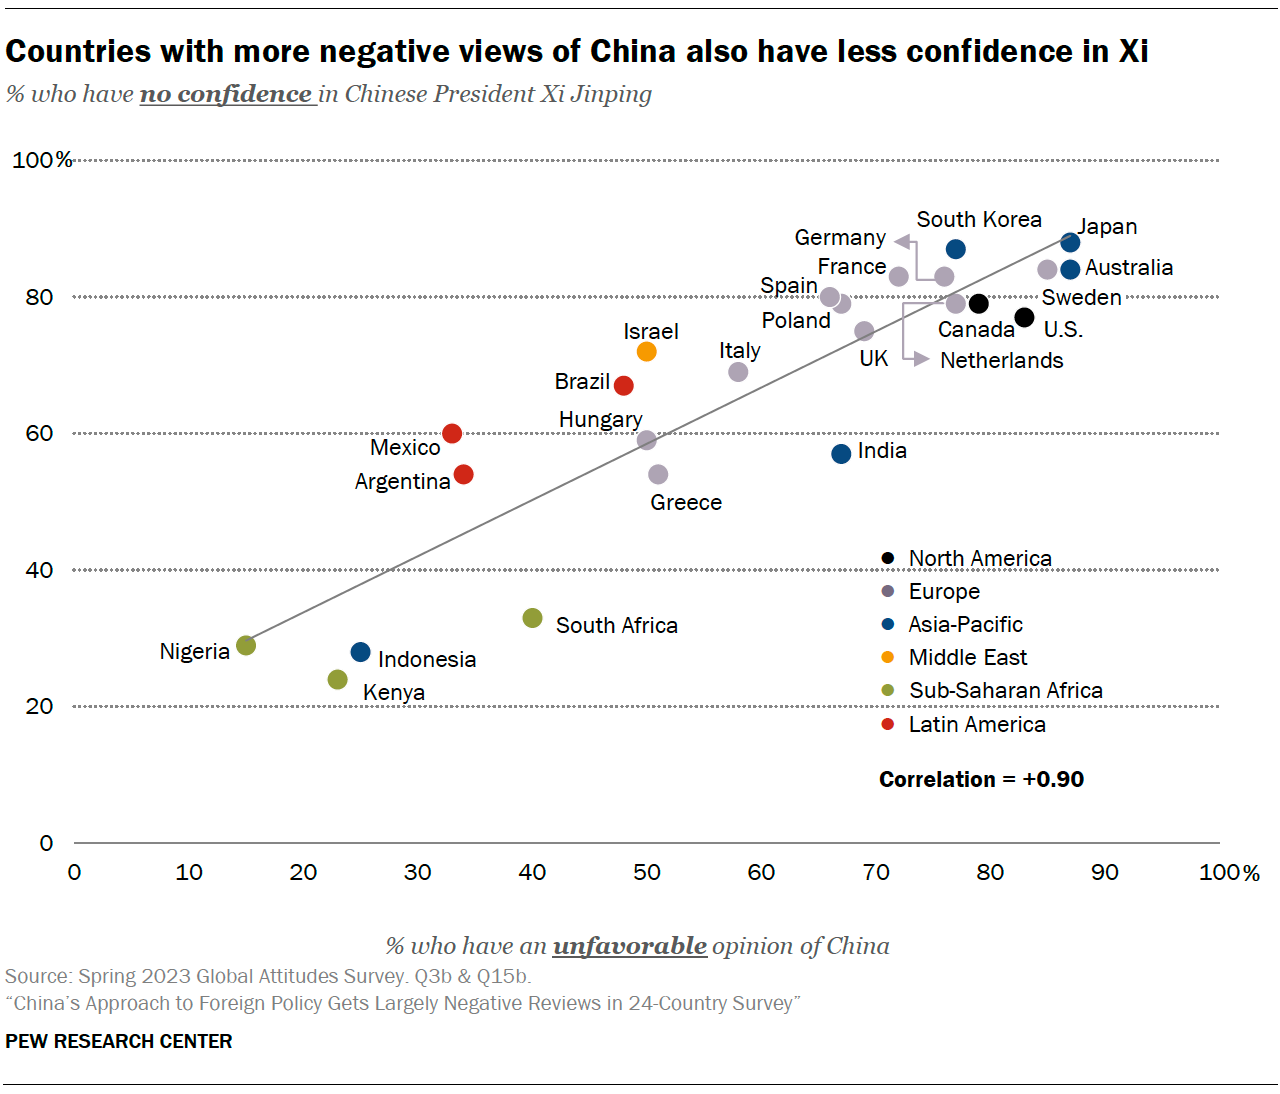 Countries with more negative views of China also have less confidence in Xi